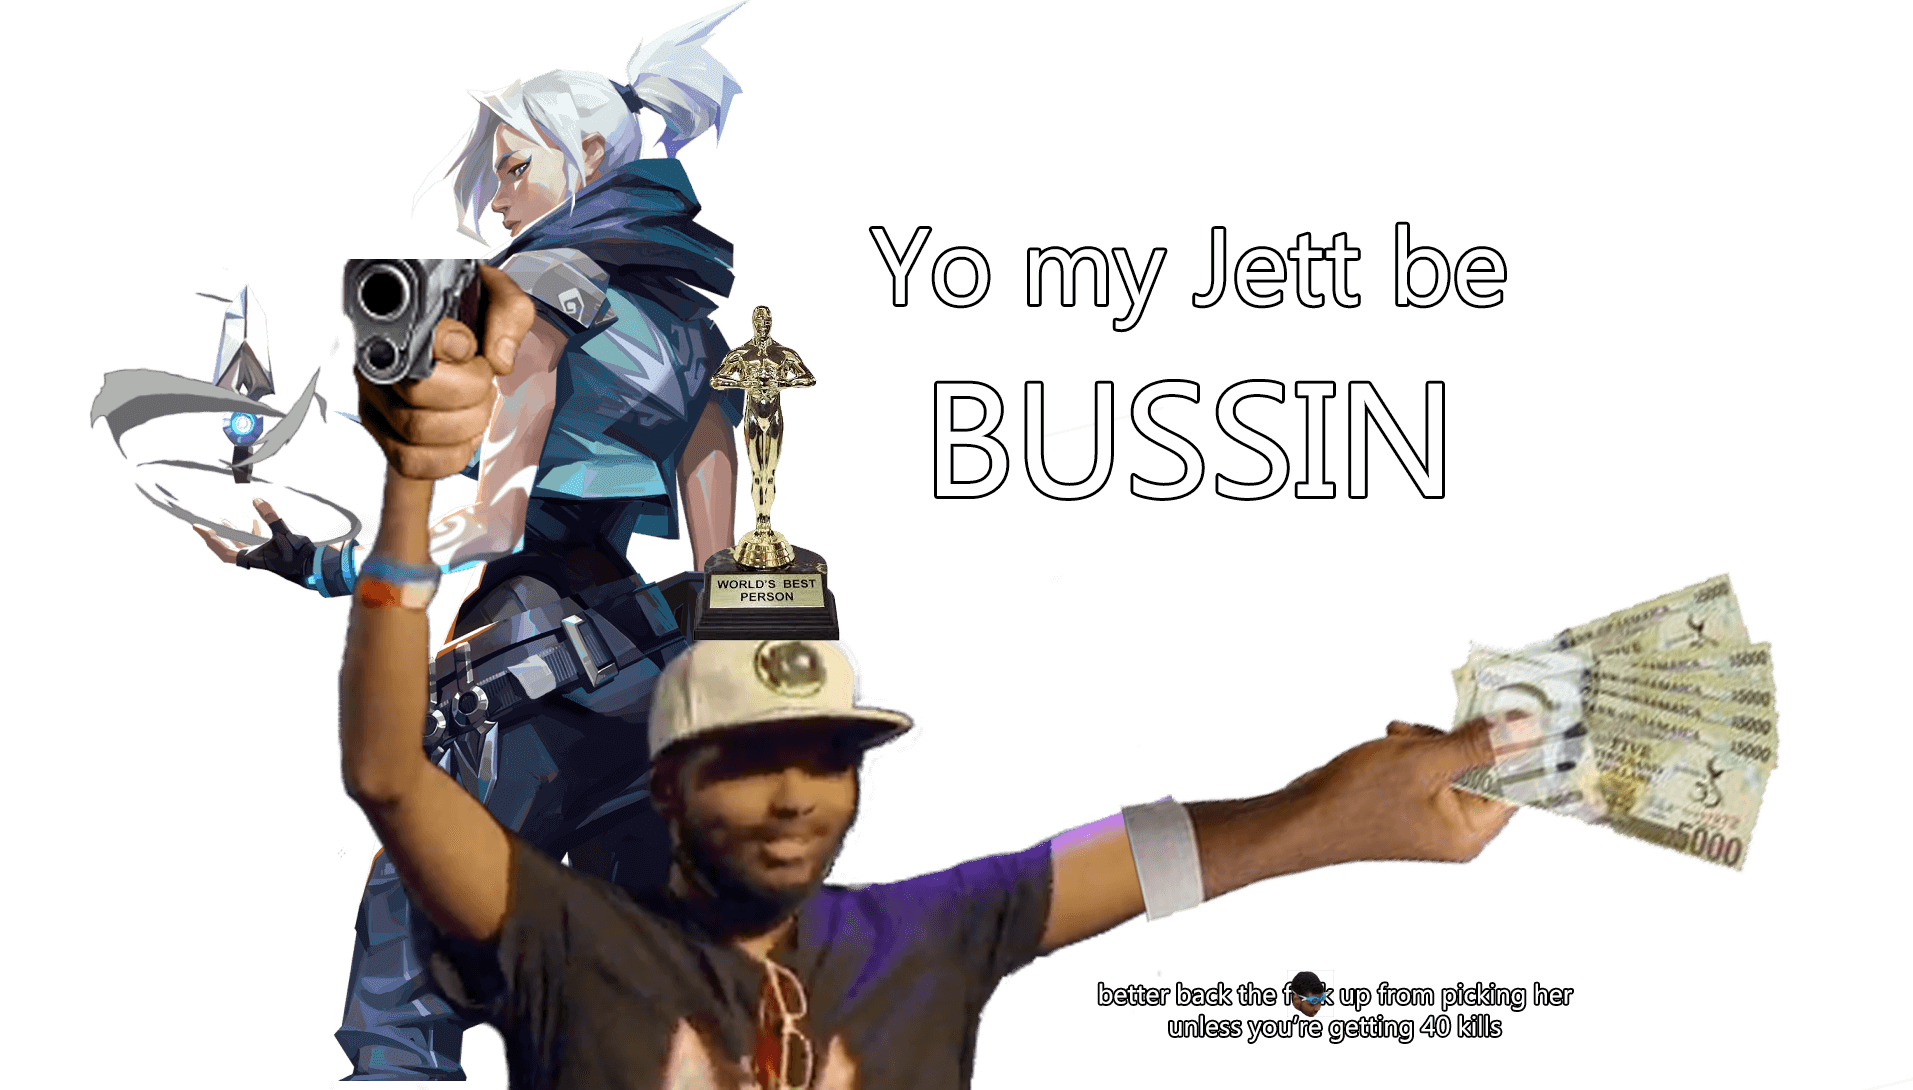 Valorant player iDrop shown photoshopped holding a gun pointed at the user as well as holding 25000 Jamaican dollars in his other hand. He has a trophy saying “World's best person” on his head. Jett from Valorant is holding a single knife. There is text saying “Yo my Jett be BUSSIN. better back the f**k up from picking her unless you're getting 40 kills”